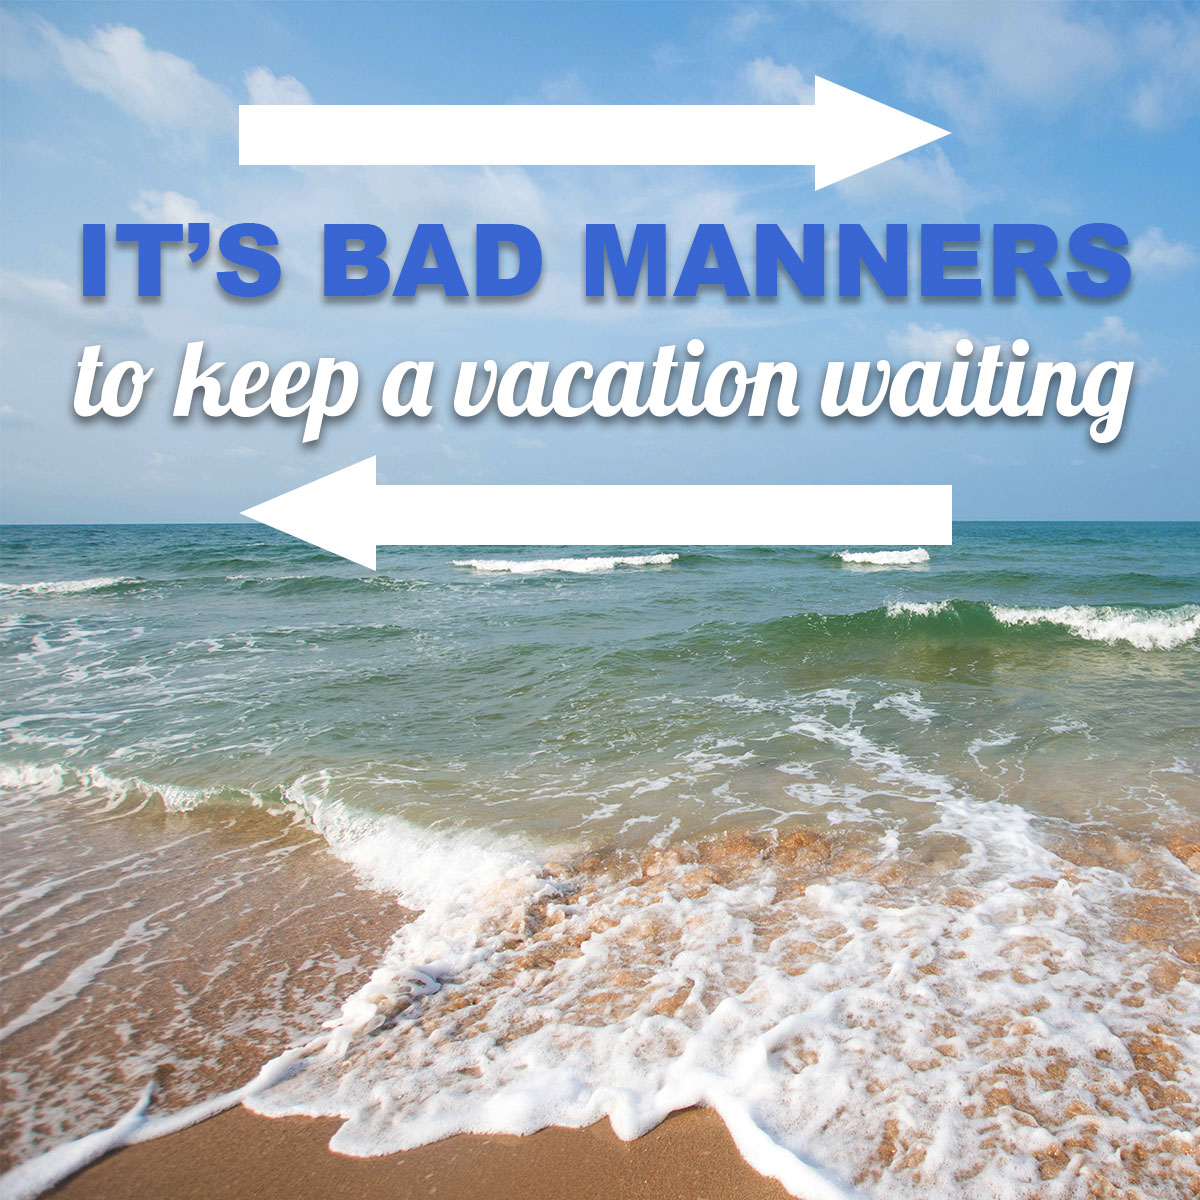 It's bad manners to keep a vacation waiting